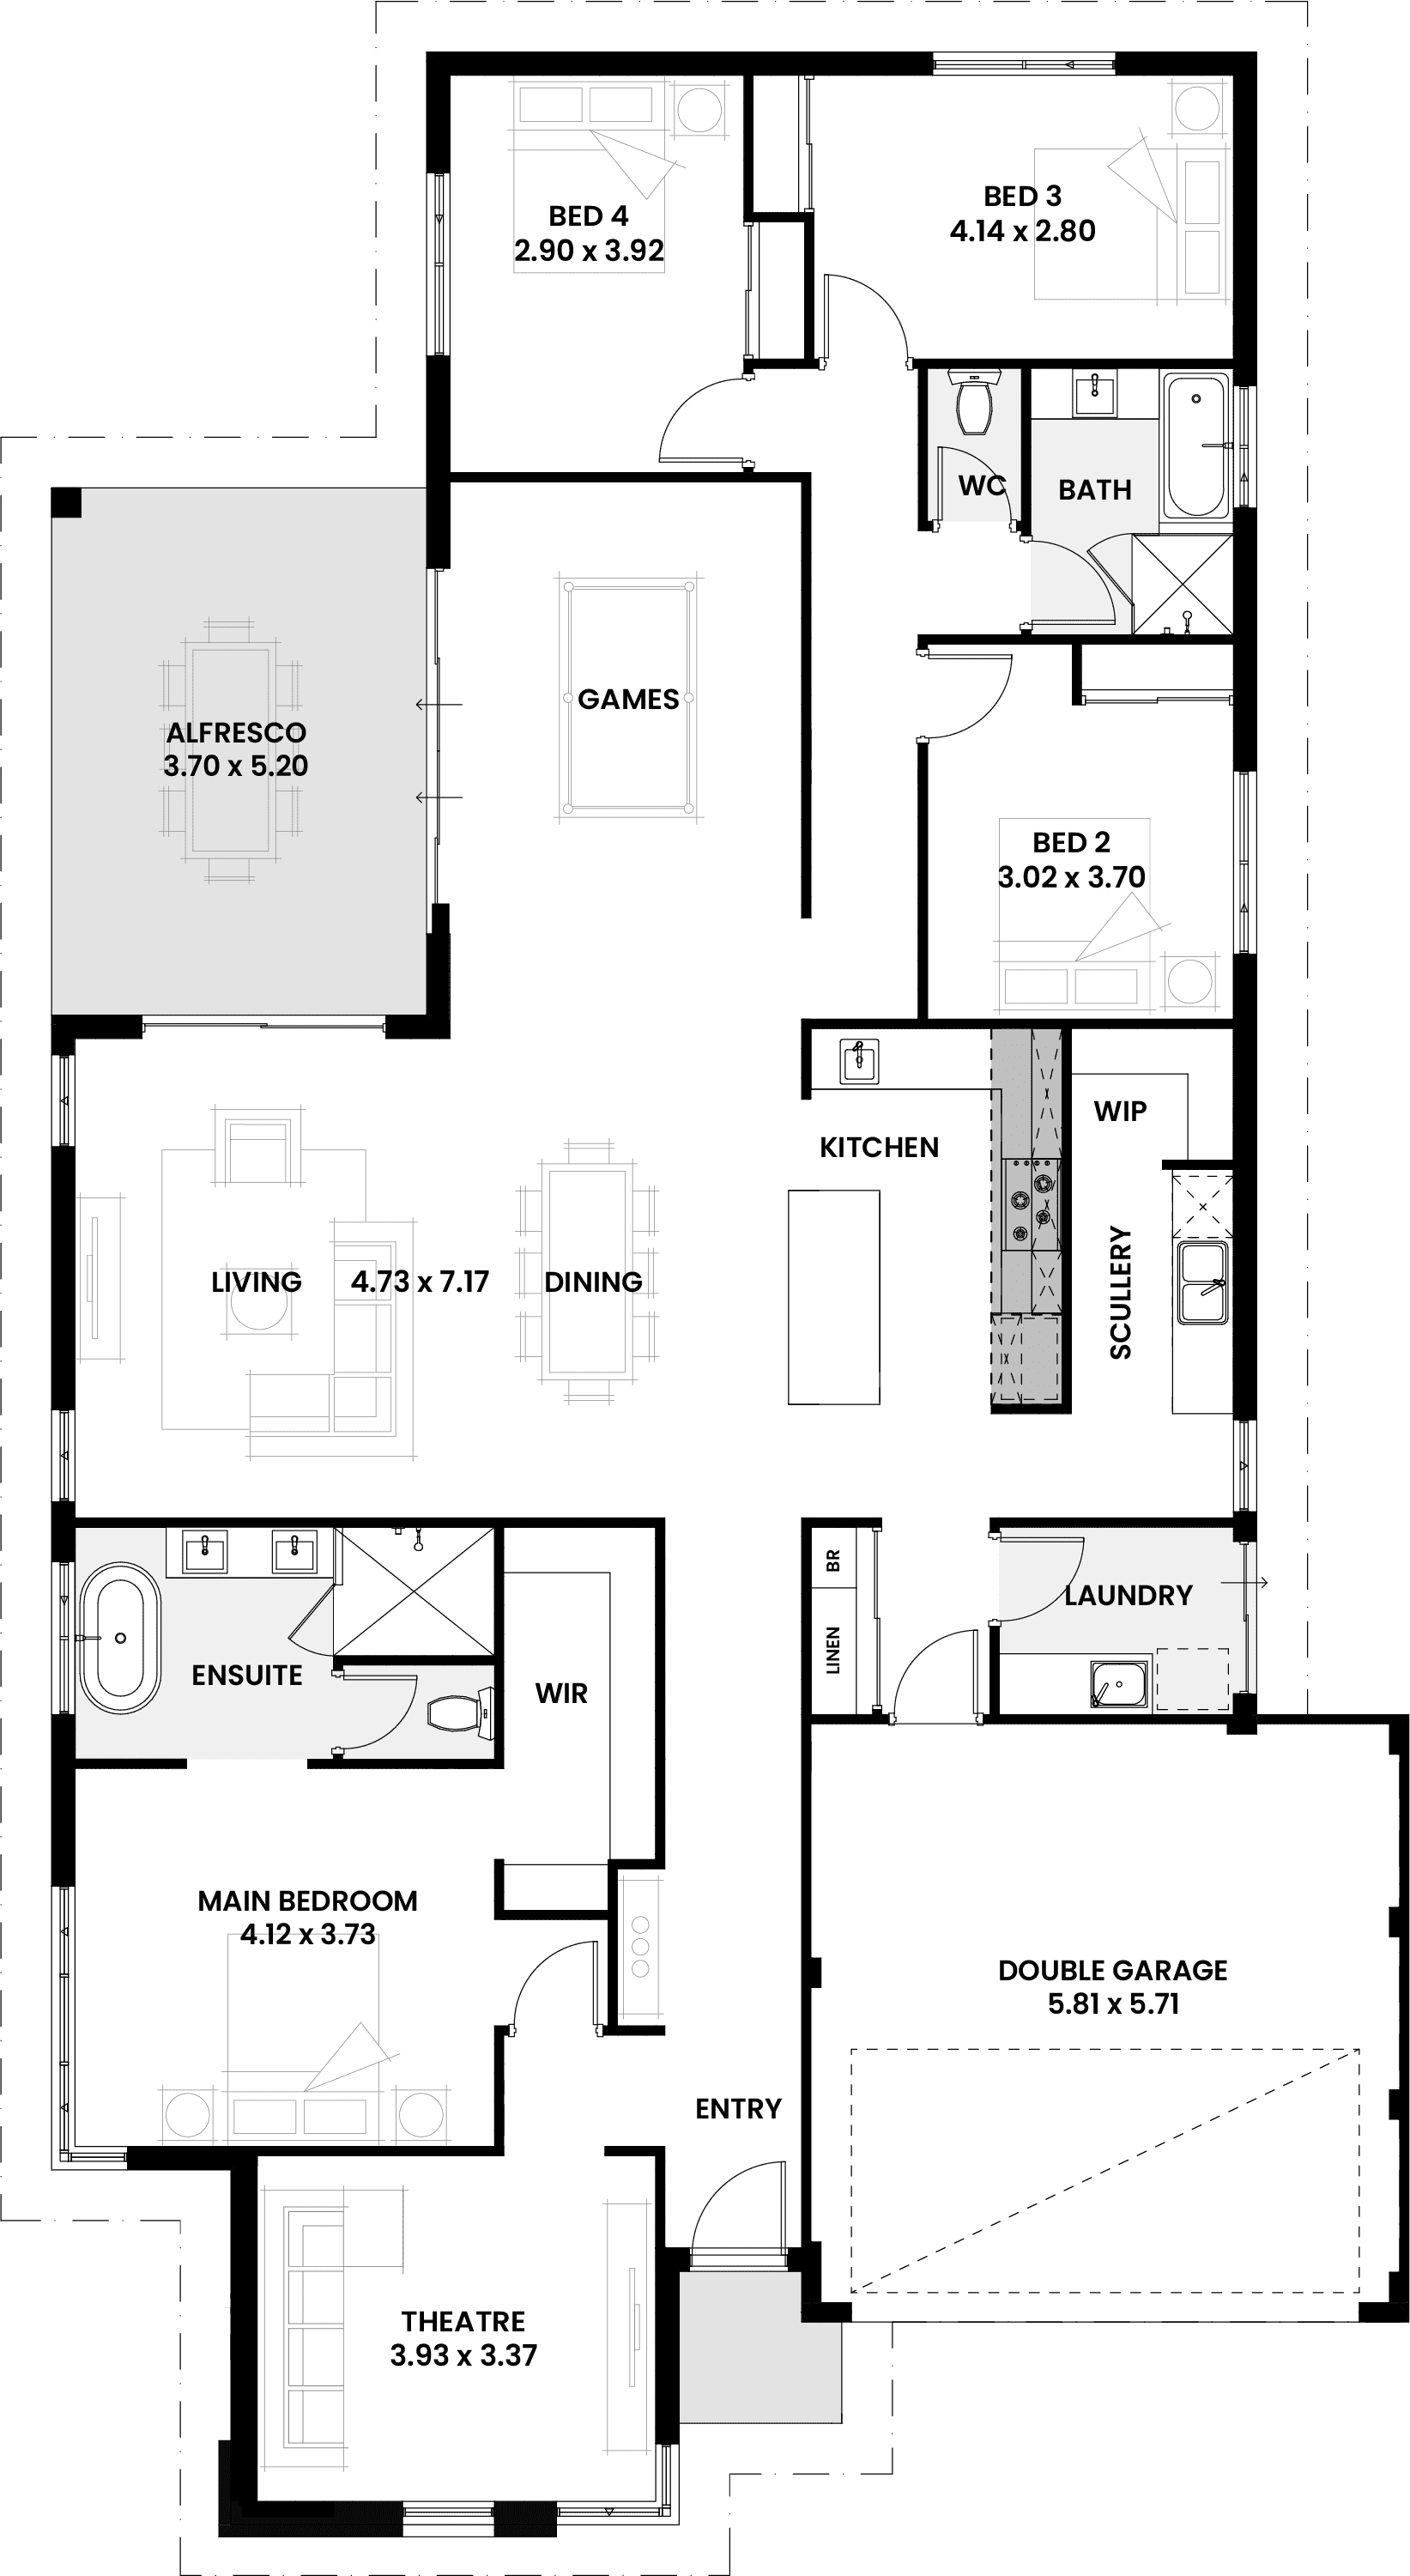 Floor plan of the Cherry display home in Perth